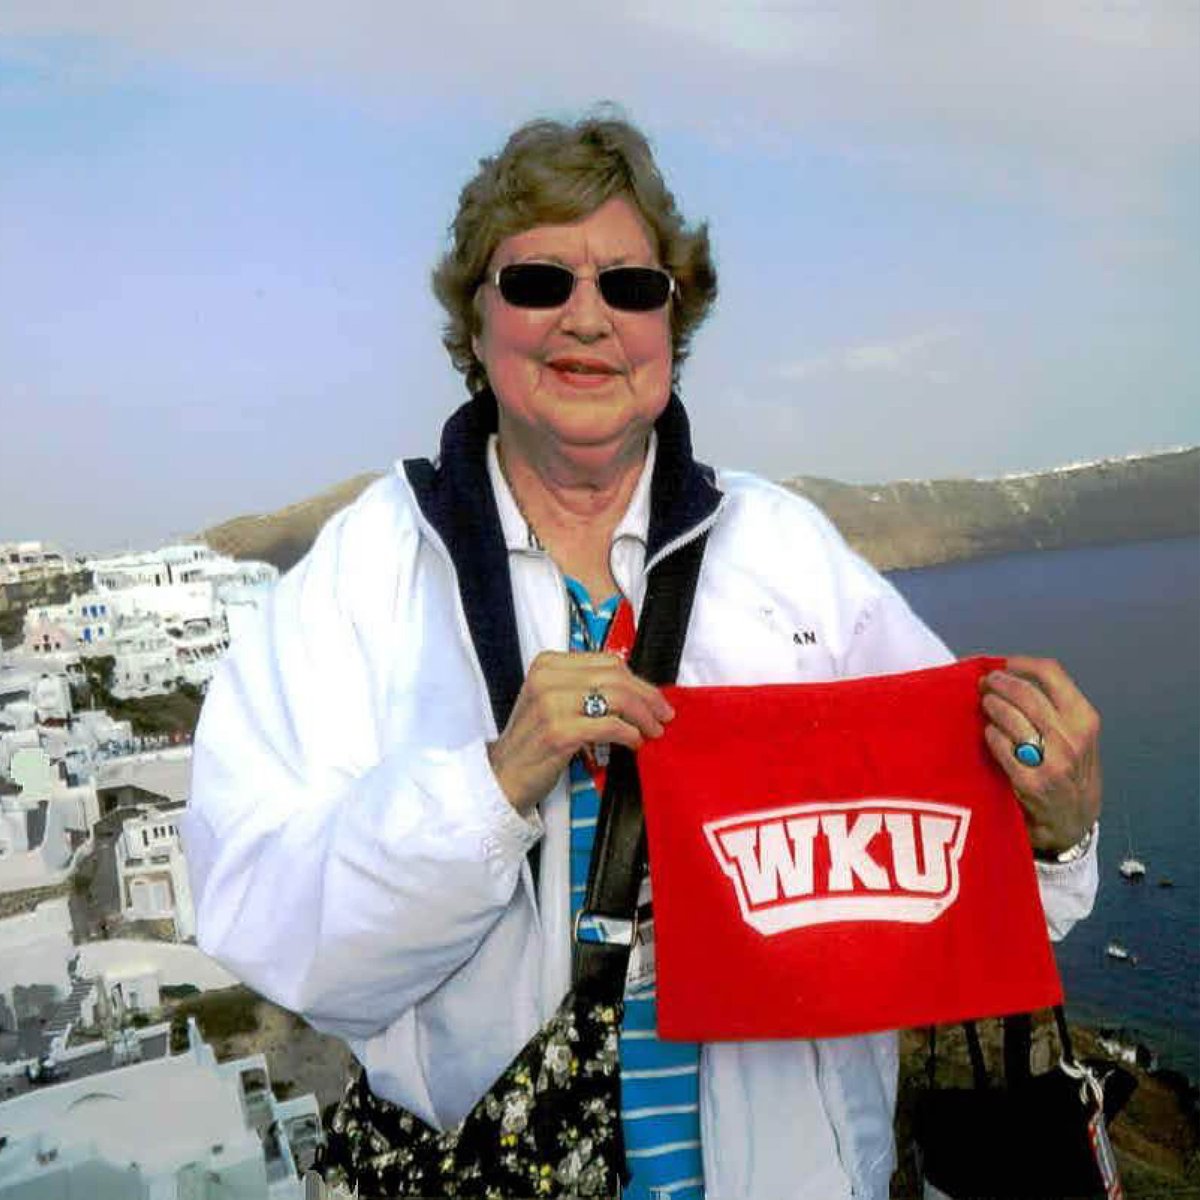 Martha Burn (’62, ’69, ’79) of Elizabethtown, Ky., is a three-time alumna and a longtime donor and an avid traveler. In honor of #WKUDayofGiving, Martha made a gift of $12,708 to enhance the Martha Burn Scholarship. Thank you, Martha!

Read more at: bit.ly/4aLmHjv.